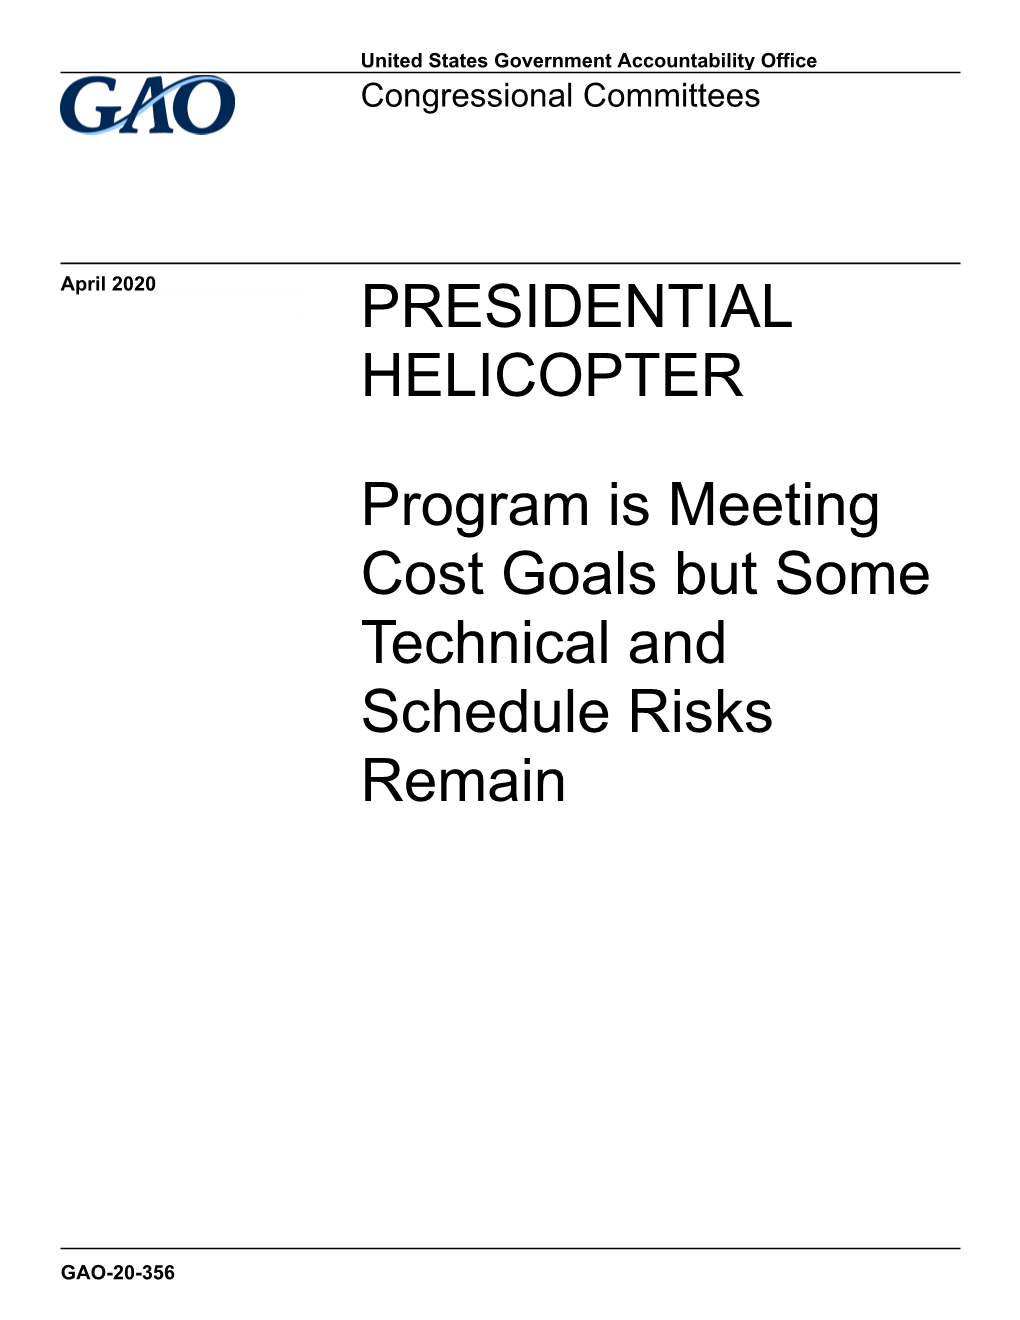 Presidential Helicopter: Program Is Meeting Cost Goals but Some